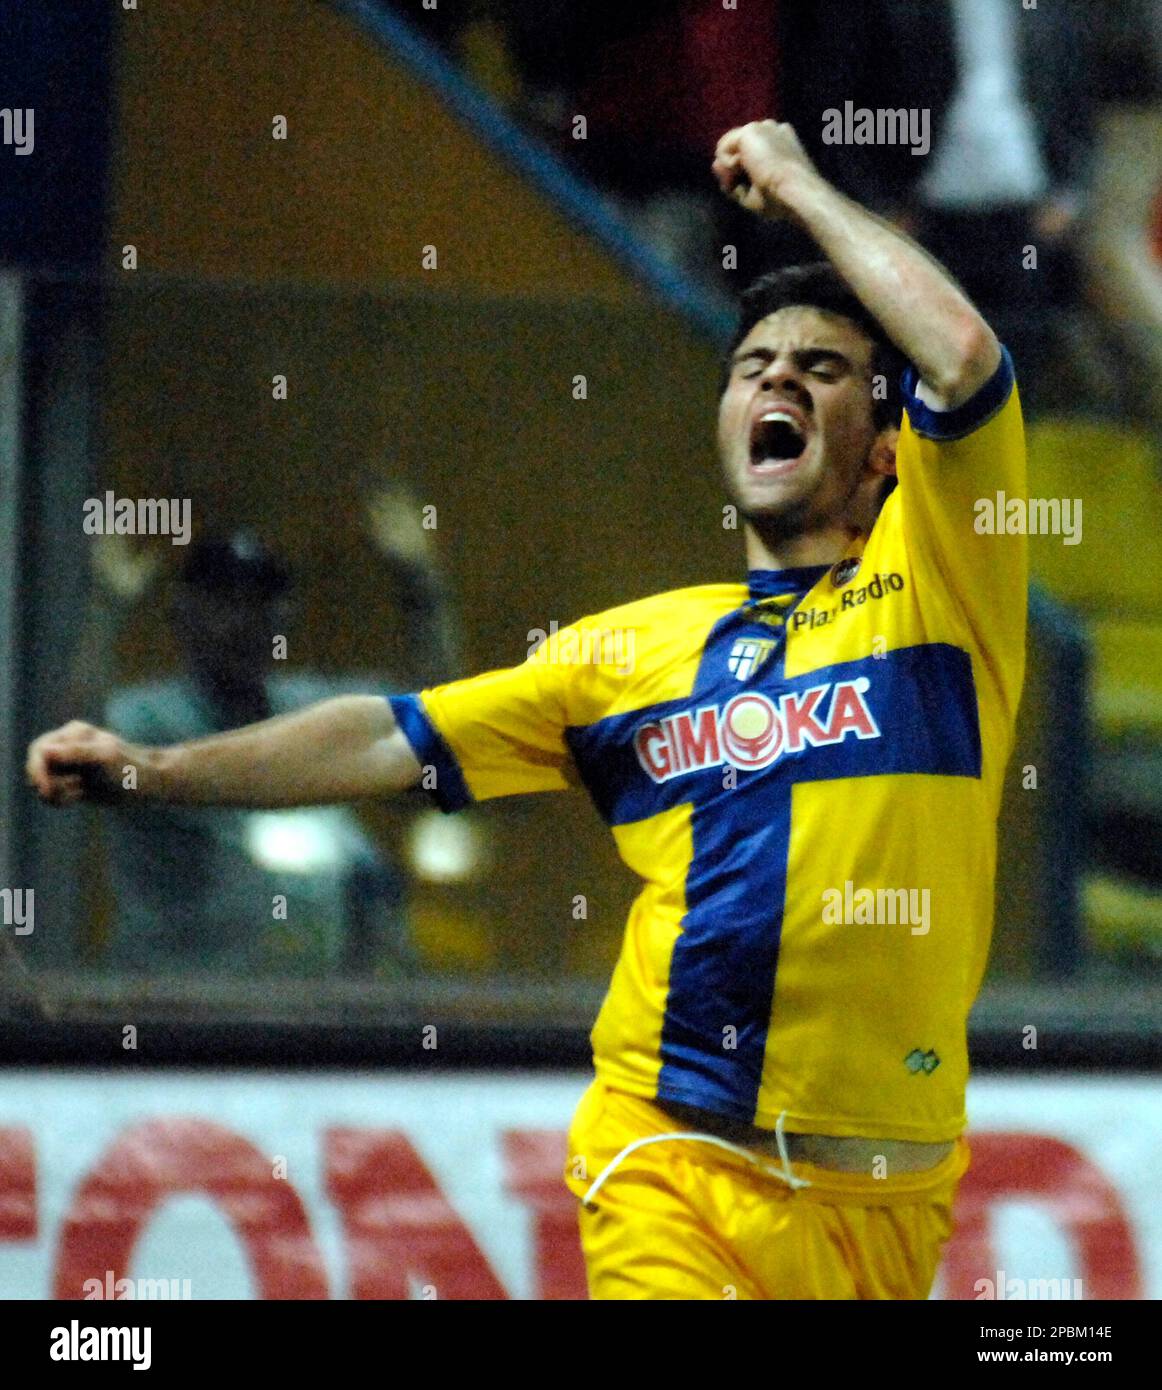 Parma's striker Giuseppe Rossi celebrates after scoring during an Italian  major league soccer match against Fiorentina at the Ennio Tardini stadium  in Parma, Italy, Wednesday night, April 18, 2007. Rossi scored twice,